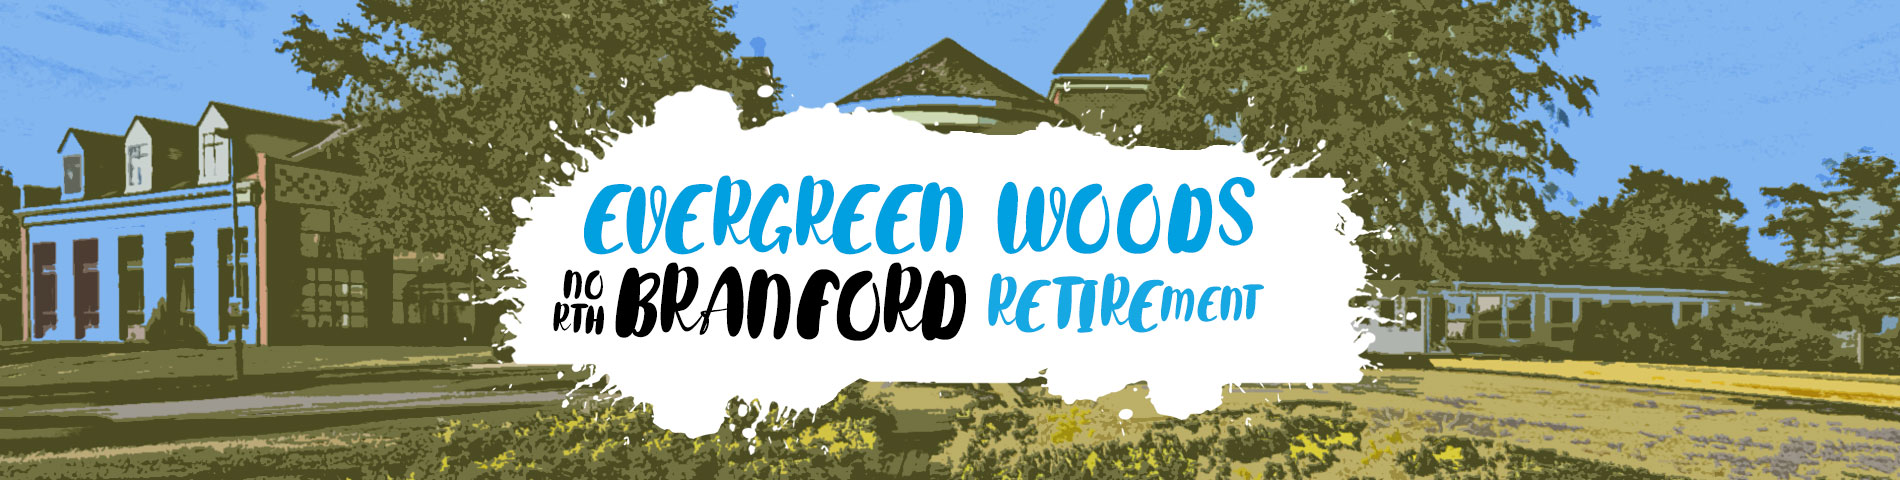 Evergreen Woods Independent Life Care Retirement